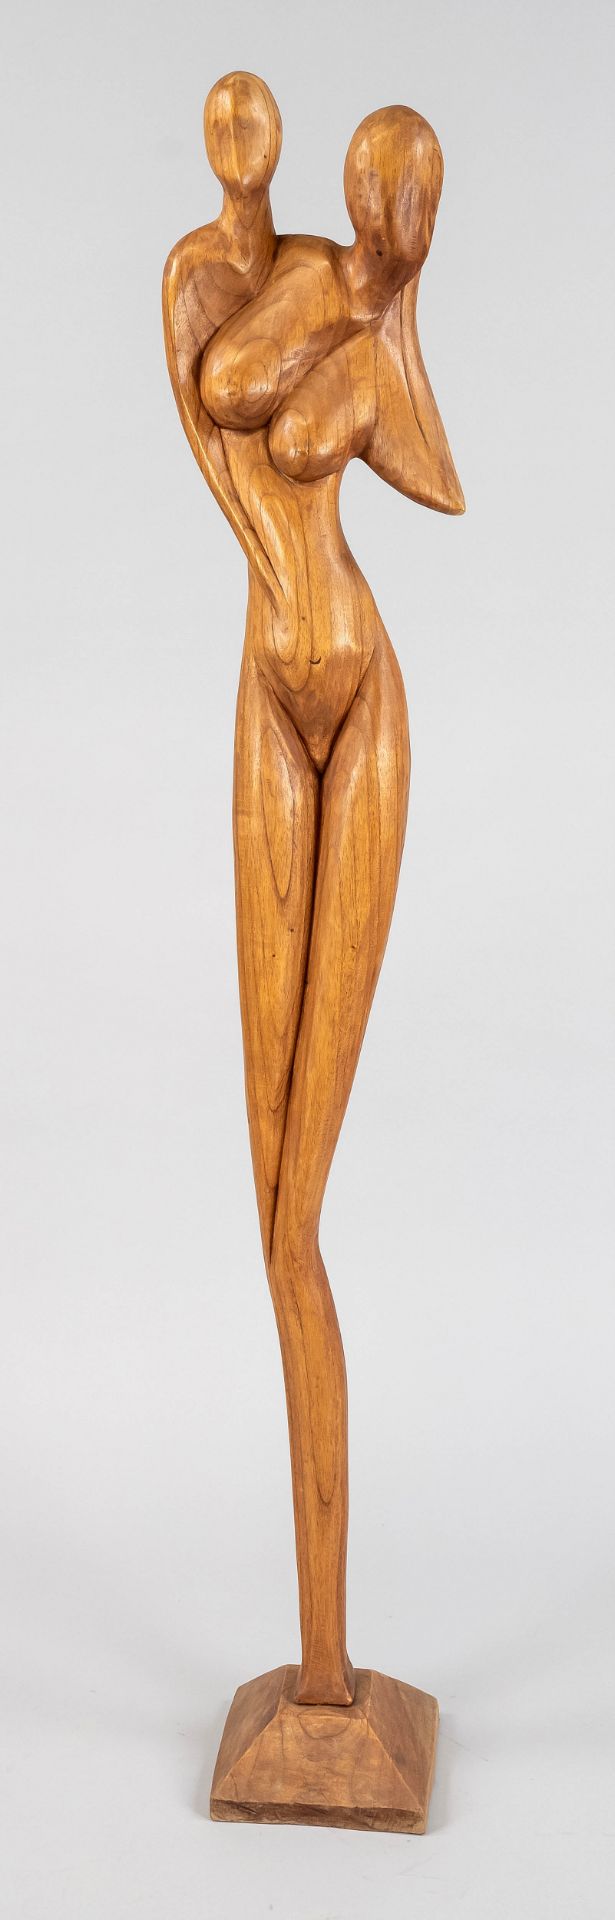 Anonymous sculptor 2nd half of 20th c., large abstract female figure made of light wood, standing on